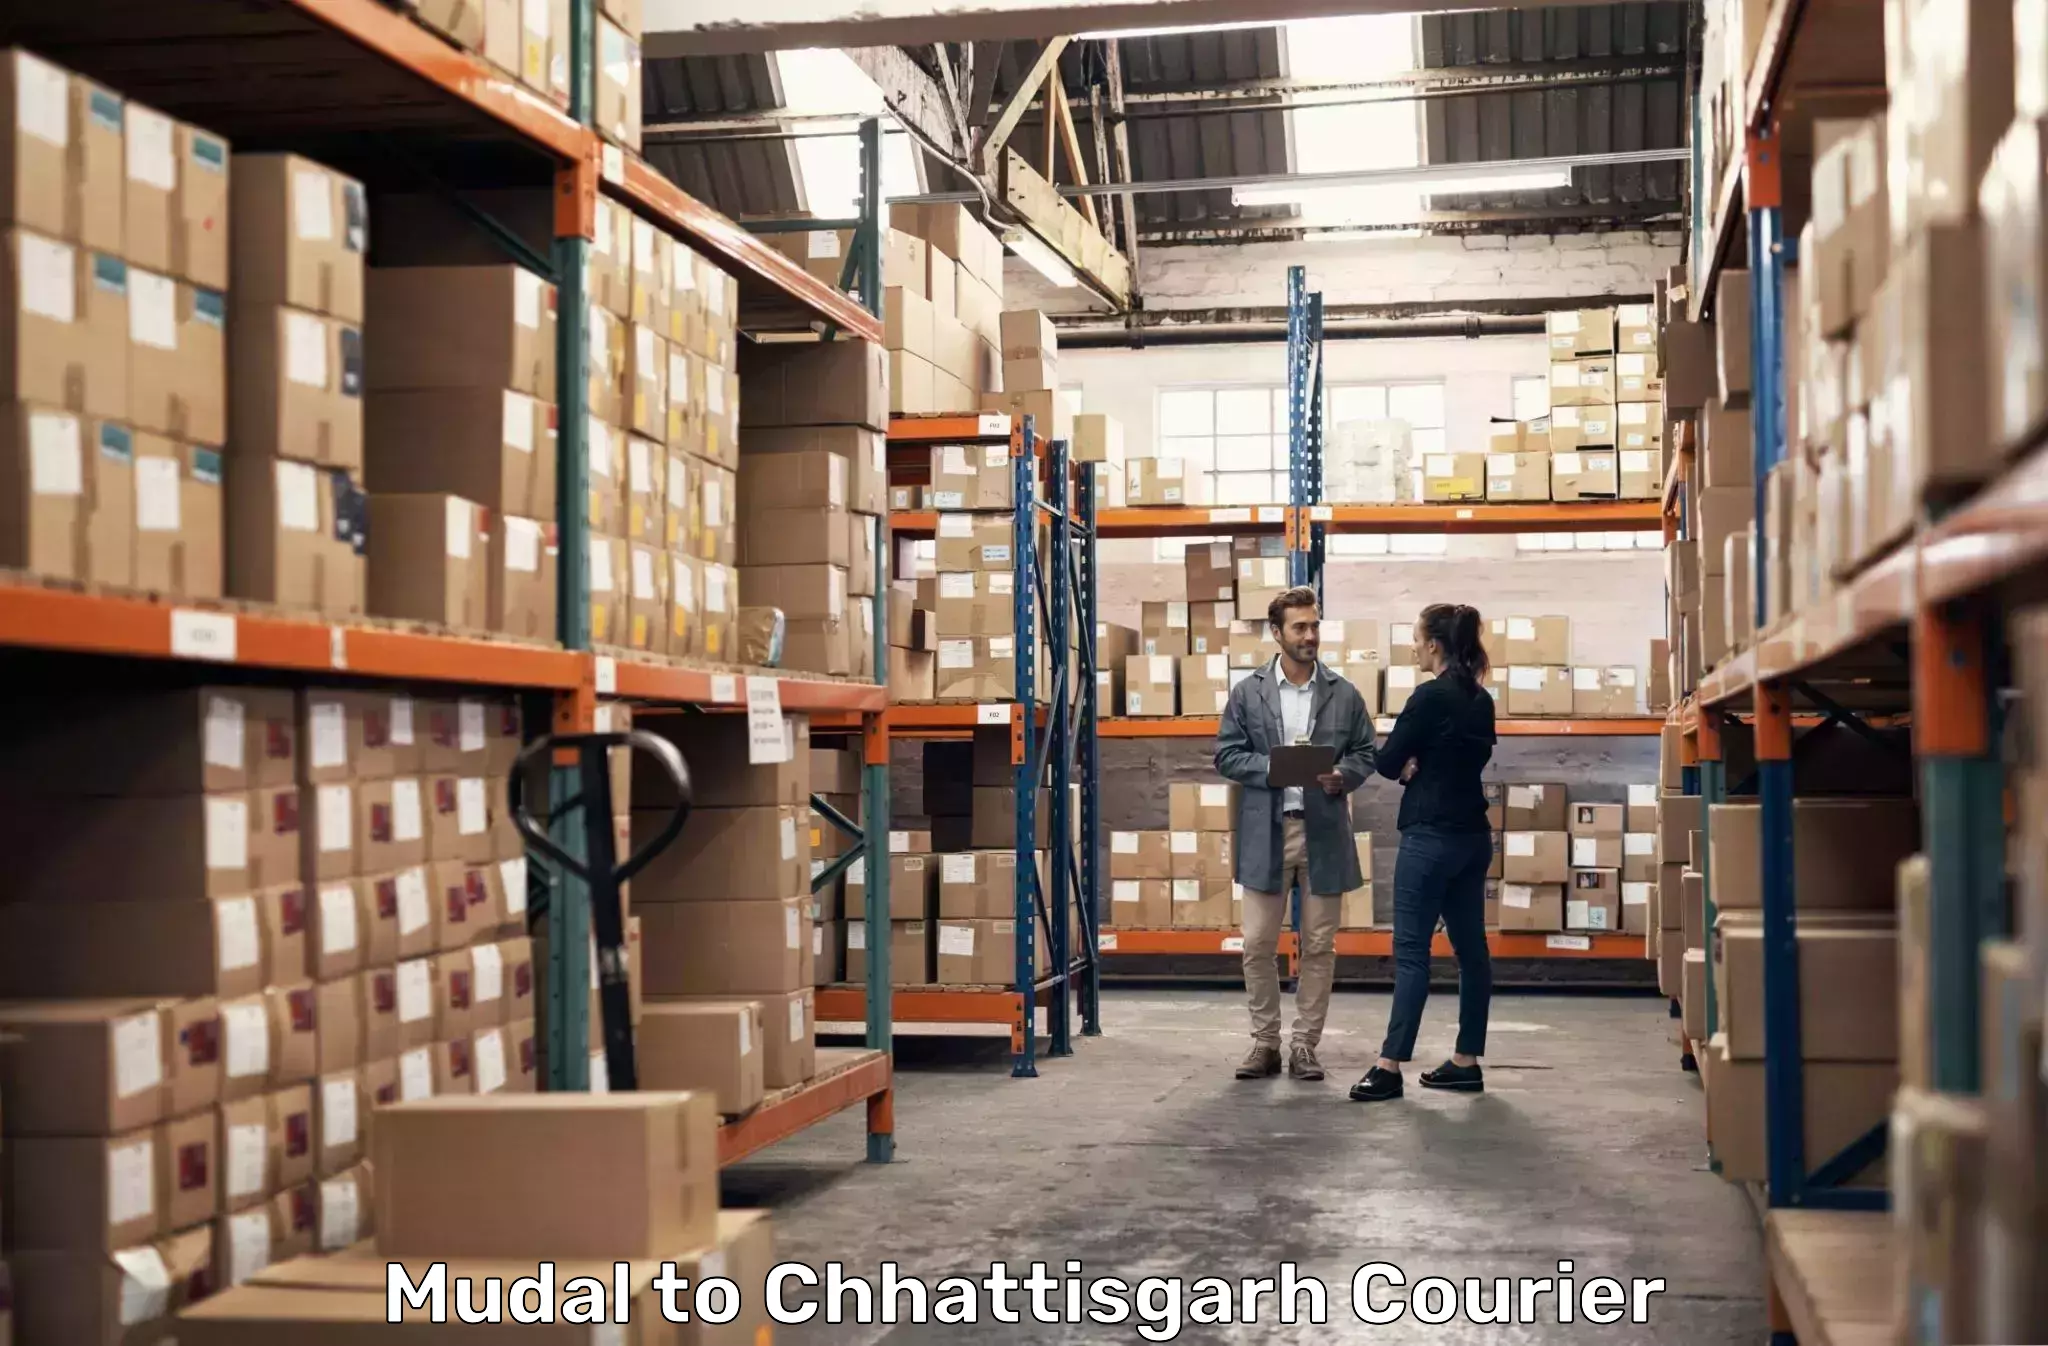 Ocean freight courier Mudal to Baramkela